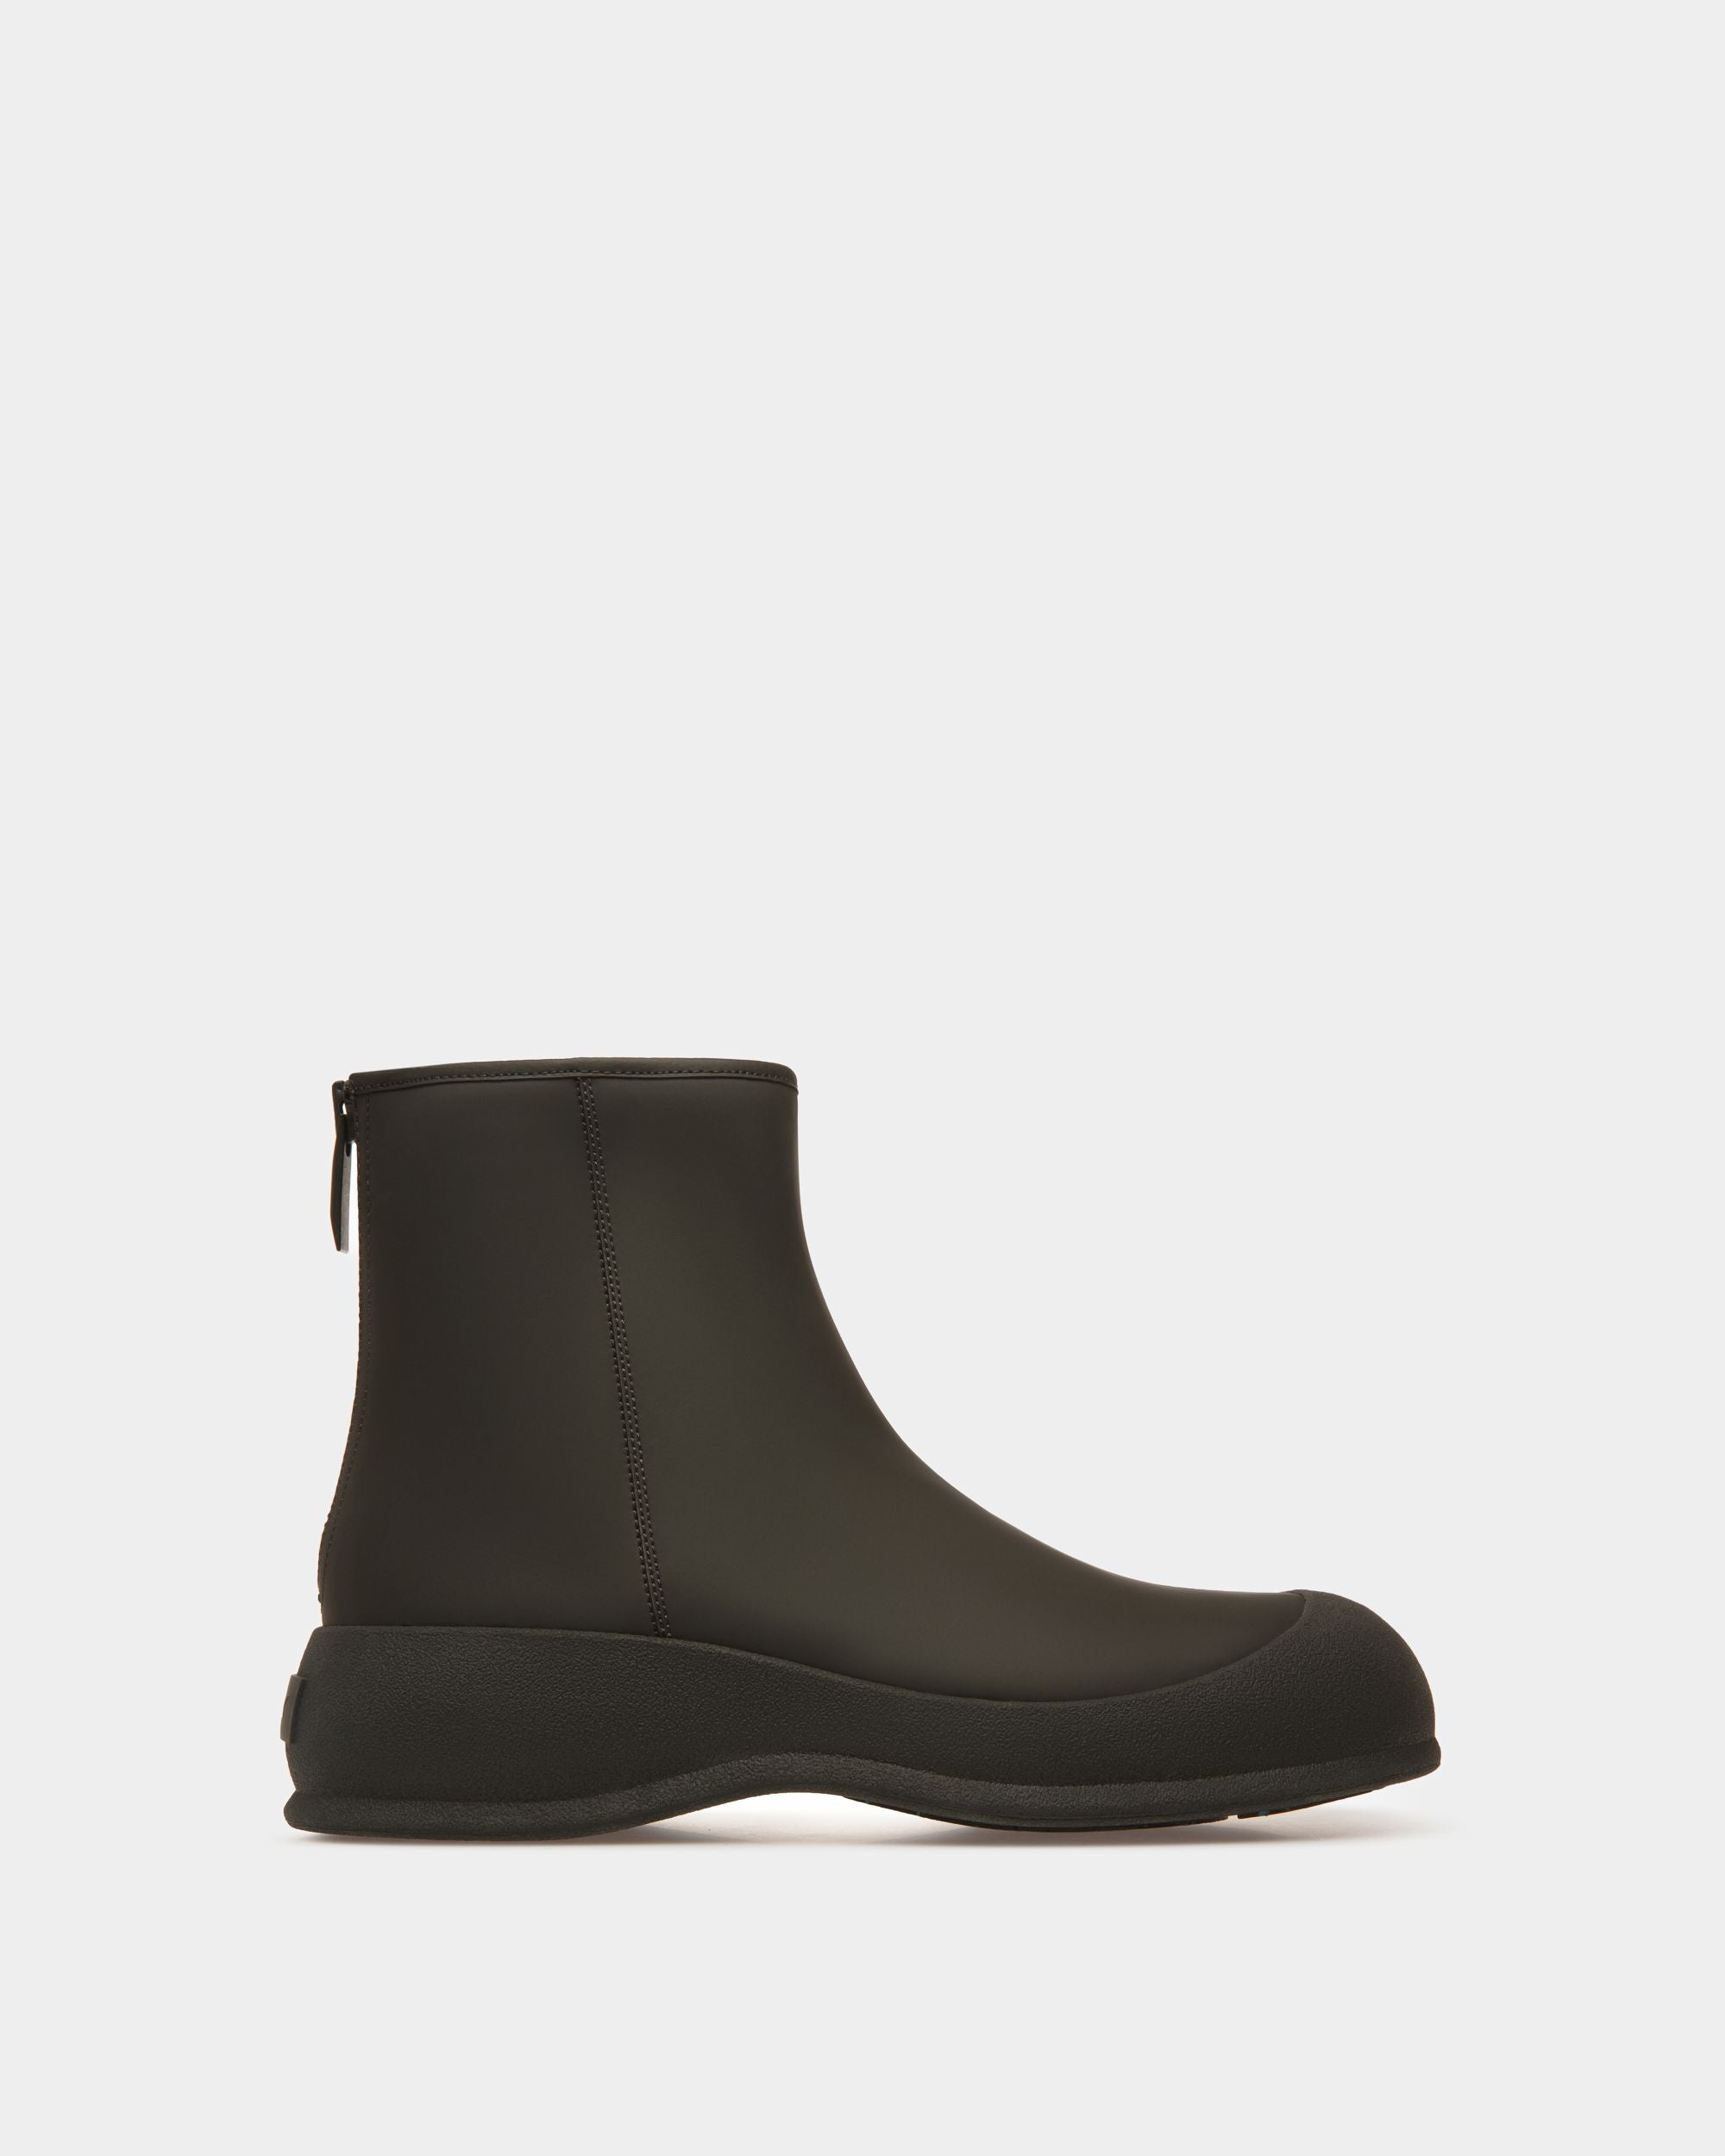 Carsey | Men's Boots | Black Leather | Bally | Still Life Side